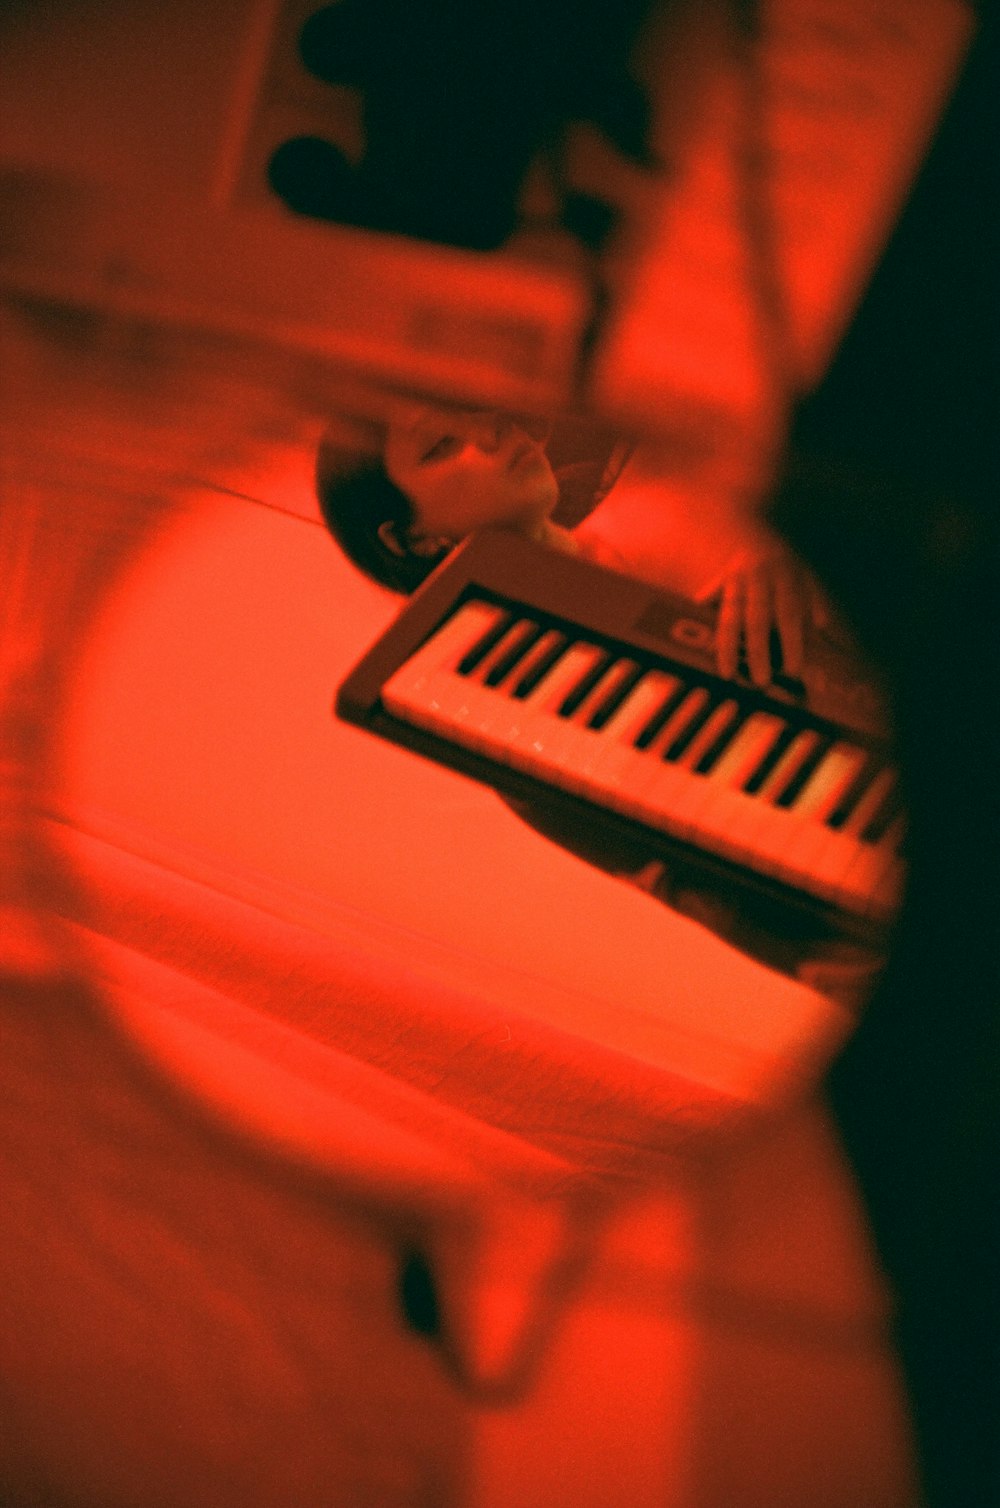 a person playing a piano with a red light